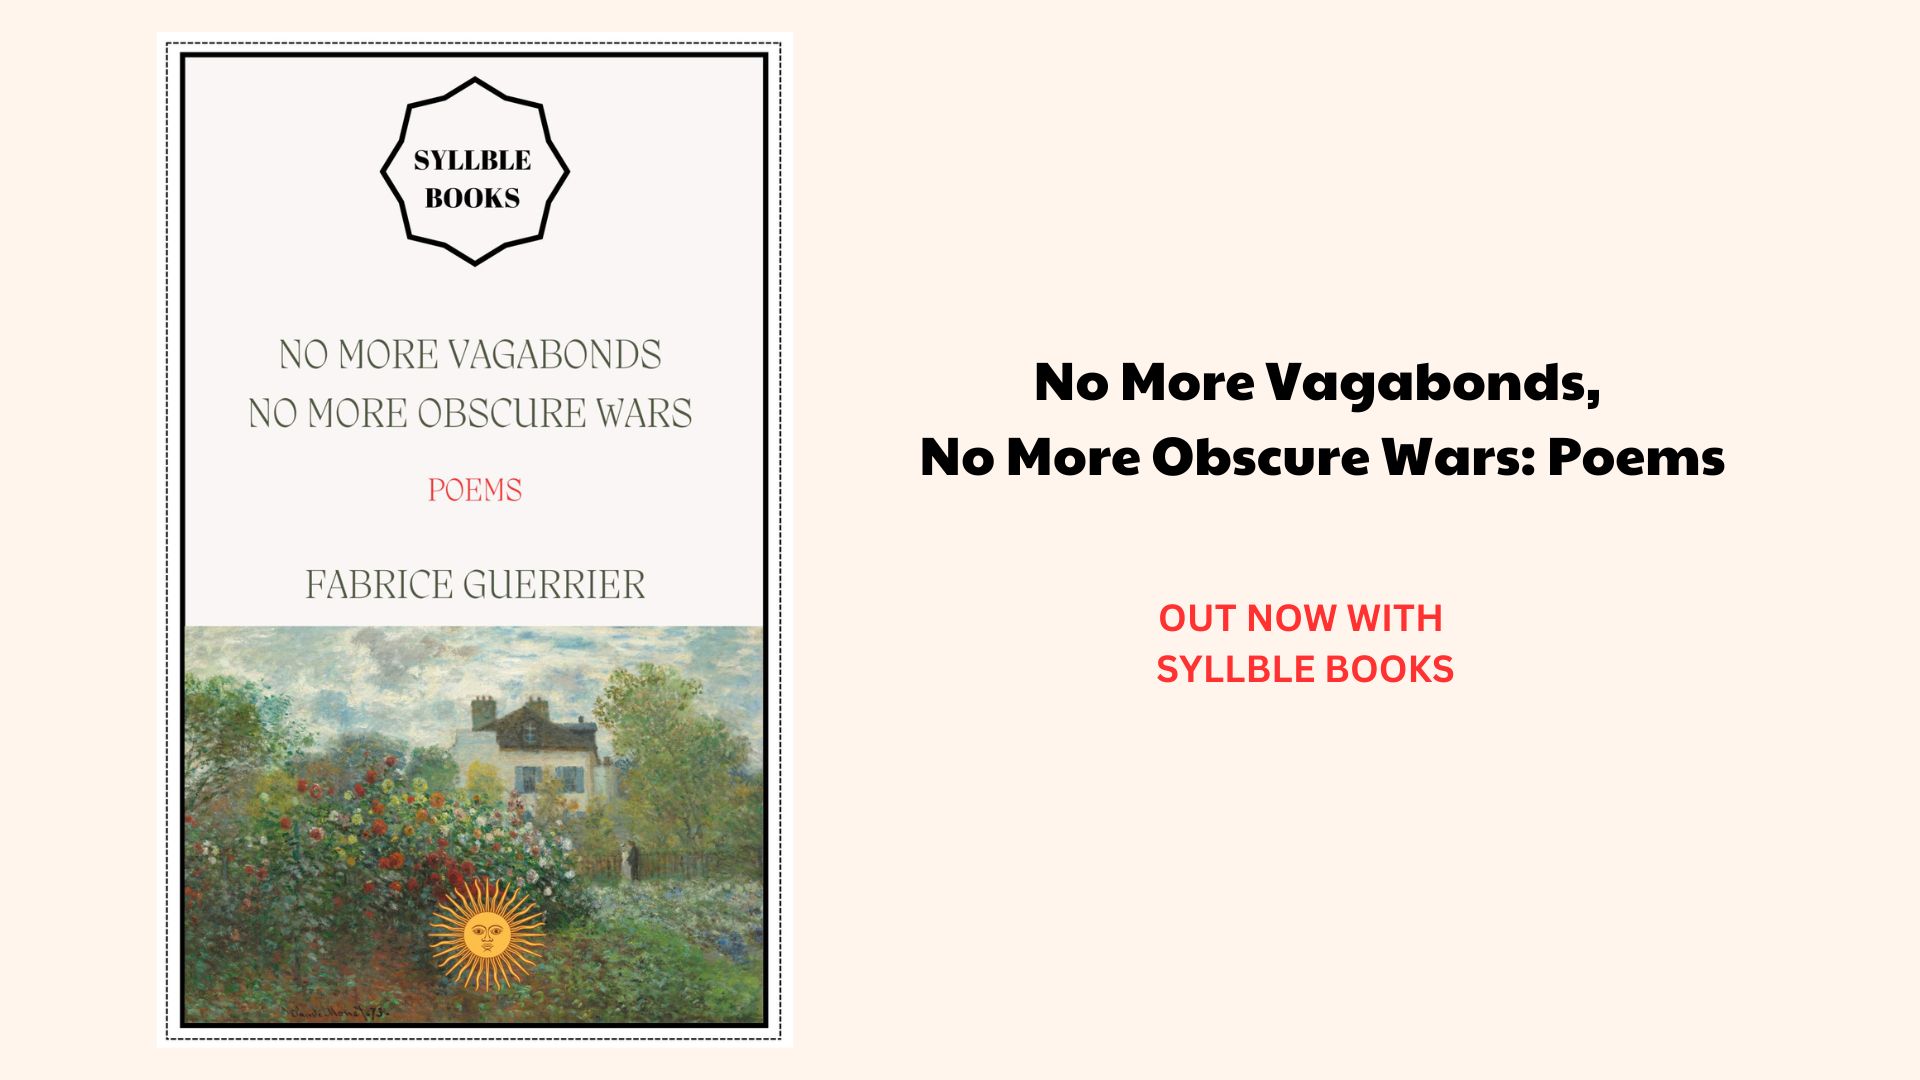 Founder Fabrice Guerrier Unveils His Second Poetry Collection, “No More Vagabonds, No More Obscure Wars”